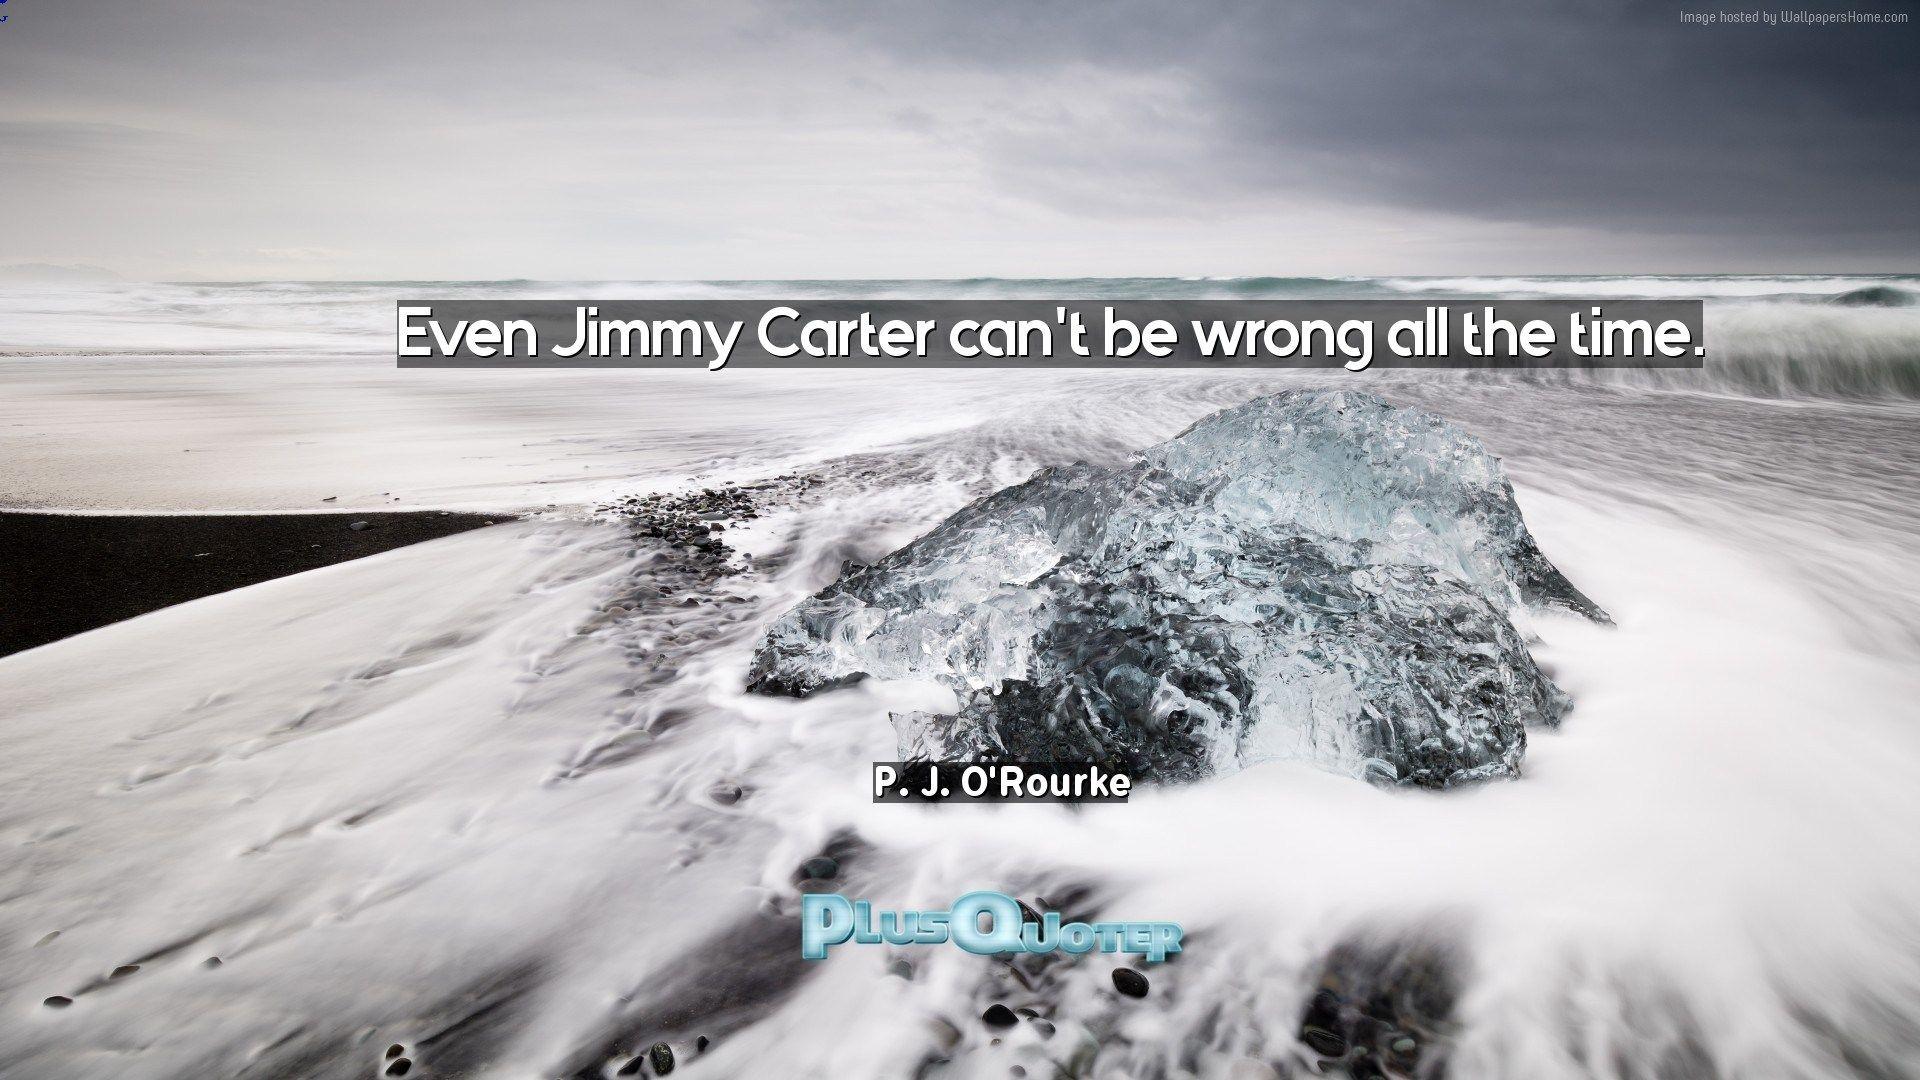 Even Jimmy Carter can't be wrong all the time- P. J. O'Rourke